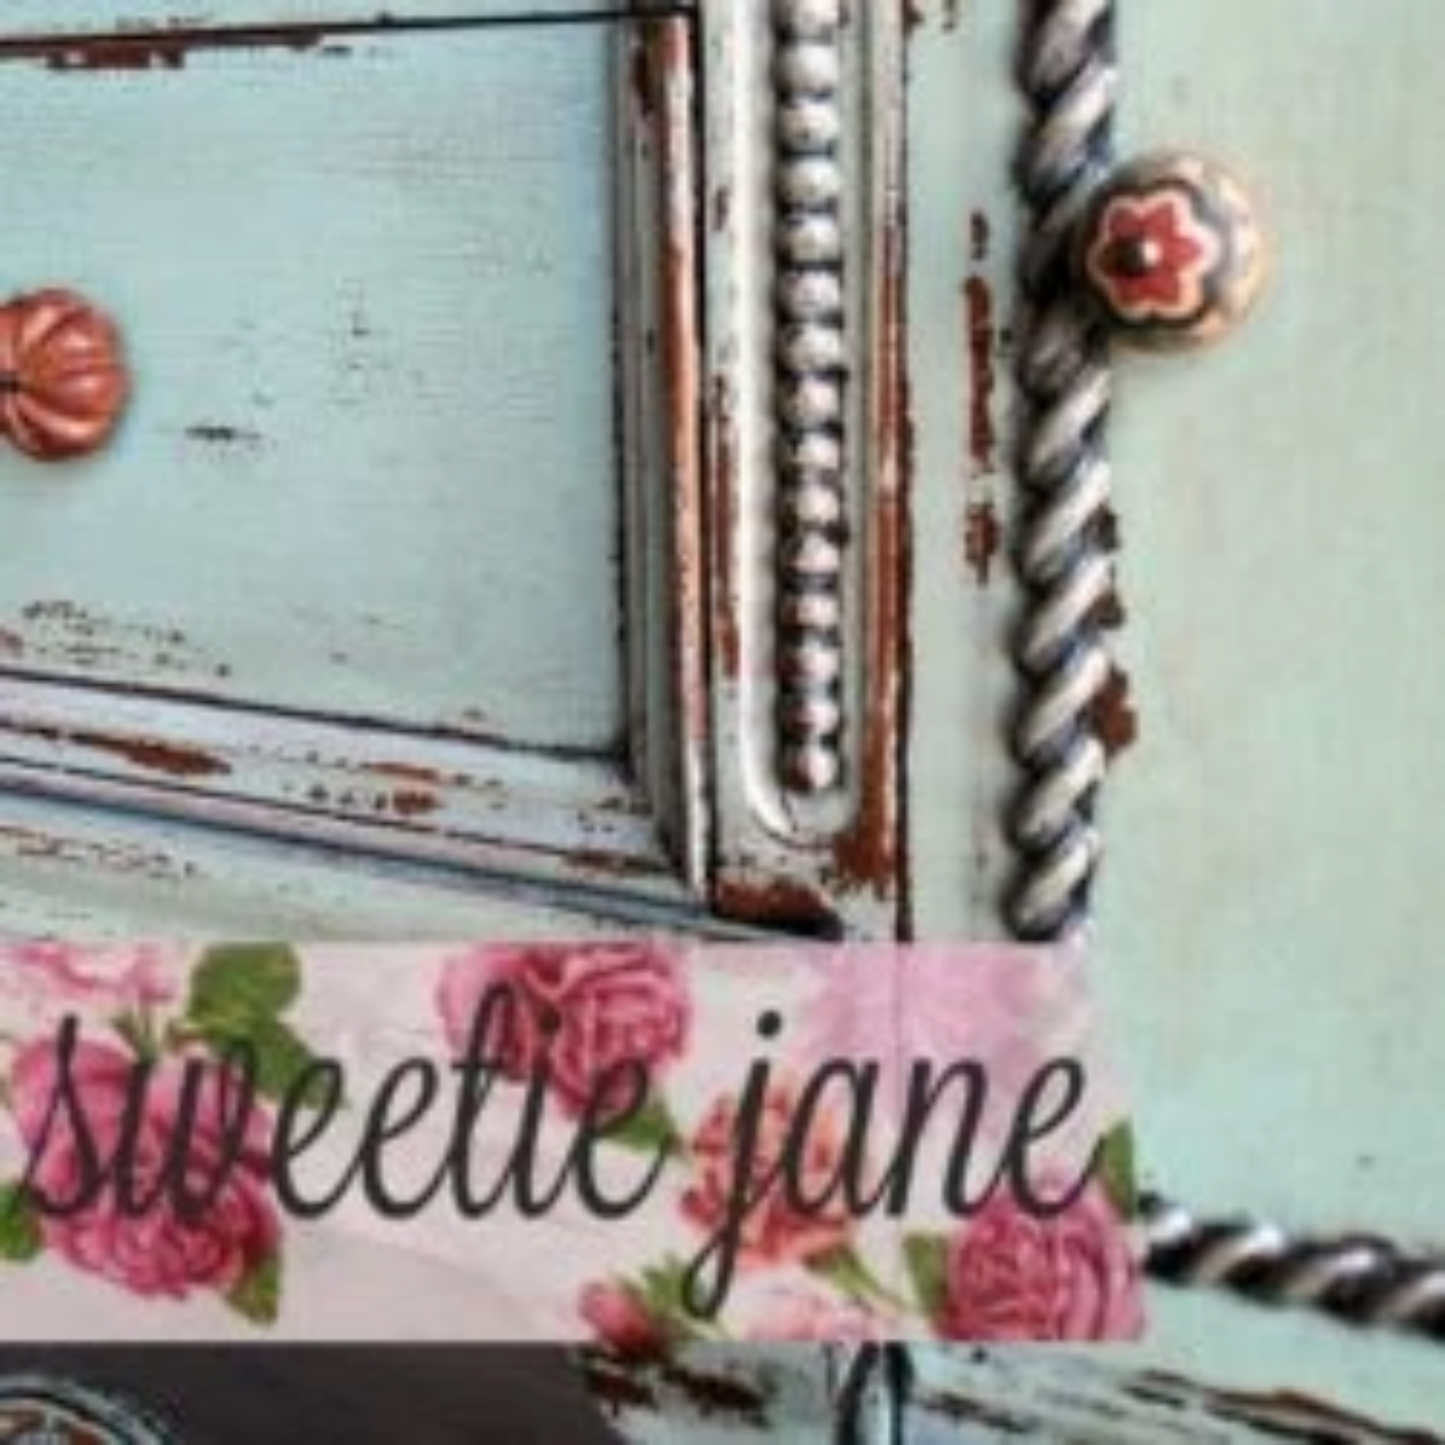 Dresser drawers painted in Sweetie Jane (pale blue) by Sweet Pickins Milk Paint available at Milton's Daughter